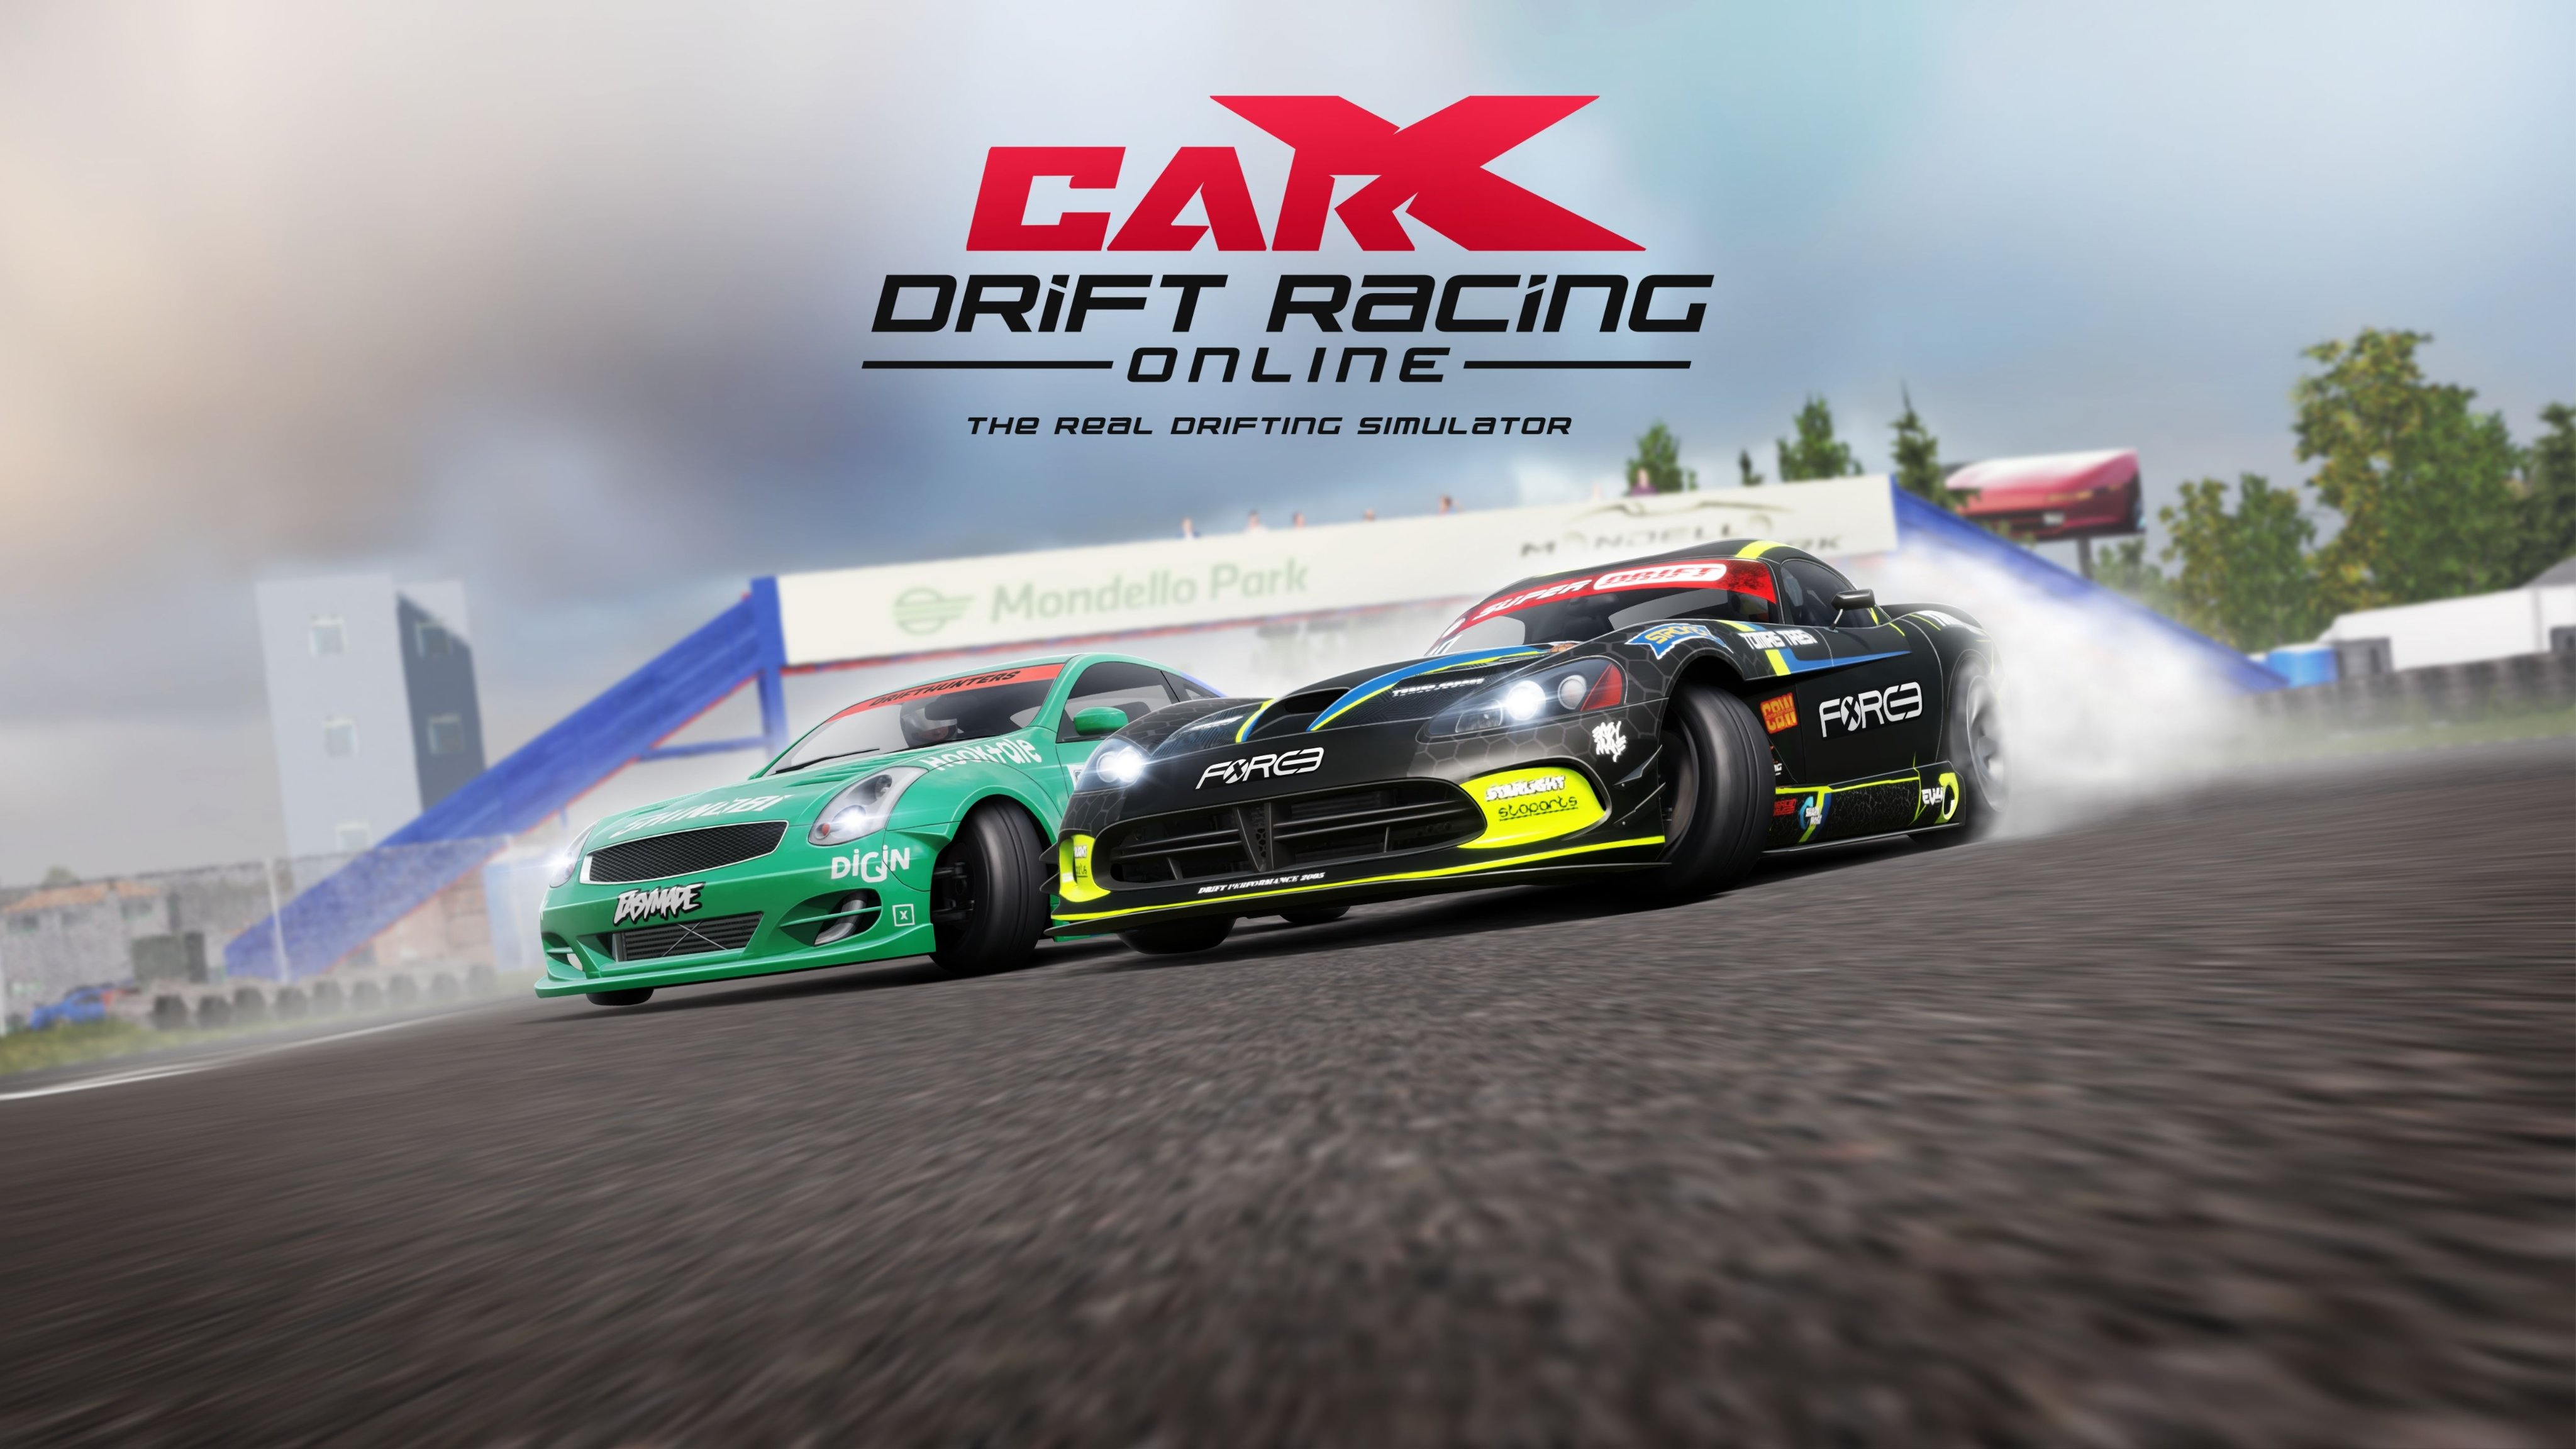 Real Drift Racing for Nintendo Switch - Nintendo Official Site